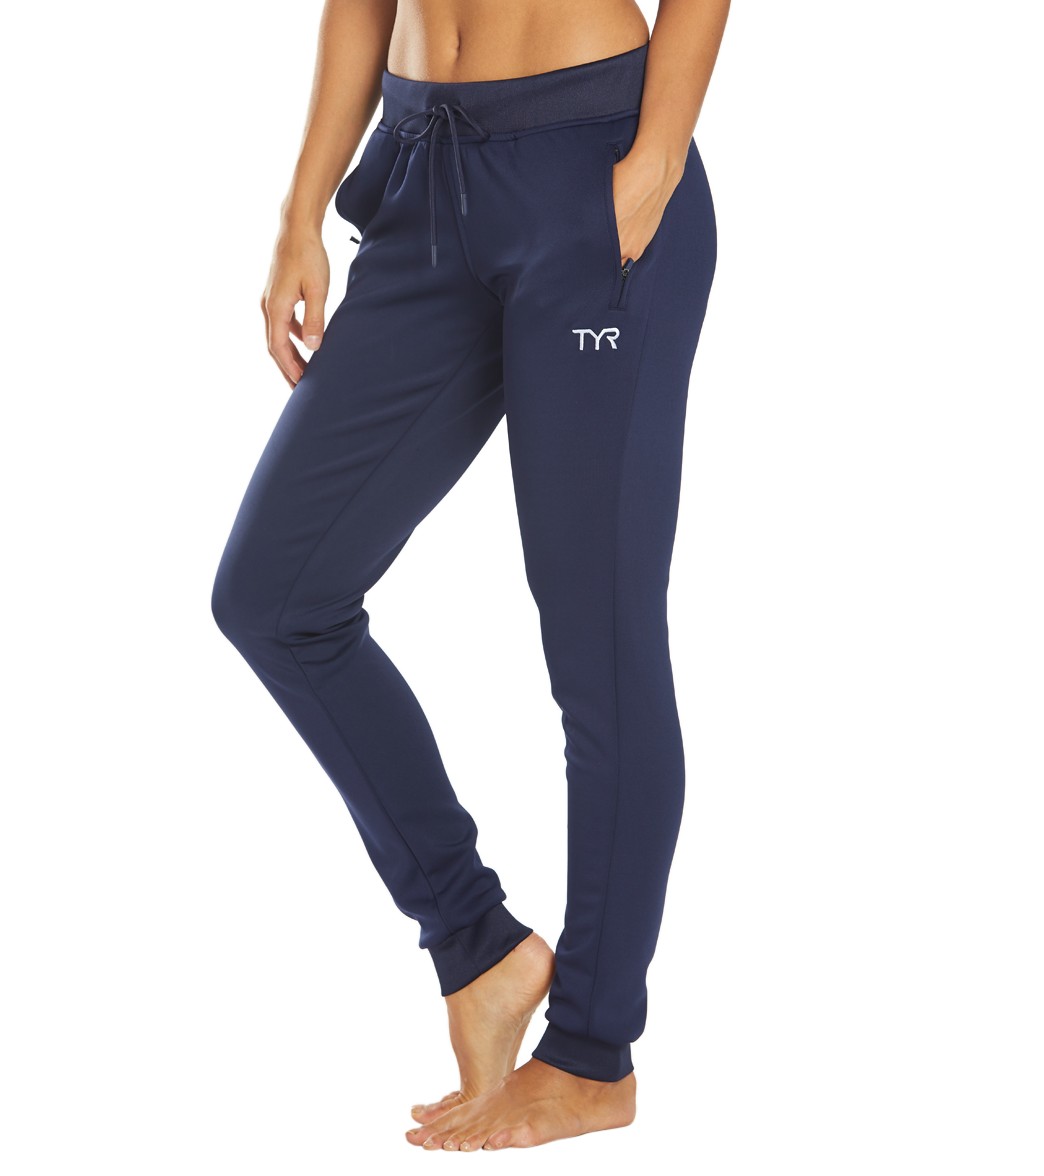 TYR Women's Team Jogger Pants - Navy Xs Size X-Small Polyester - Swimoutlet.com